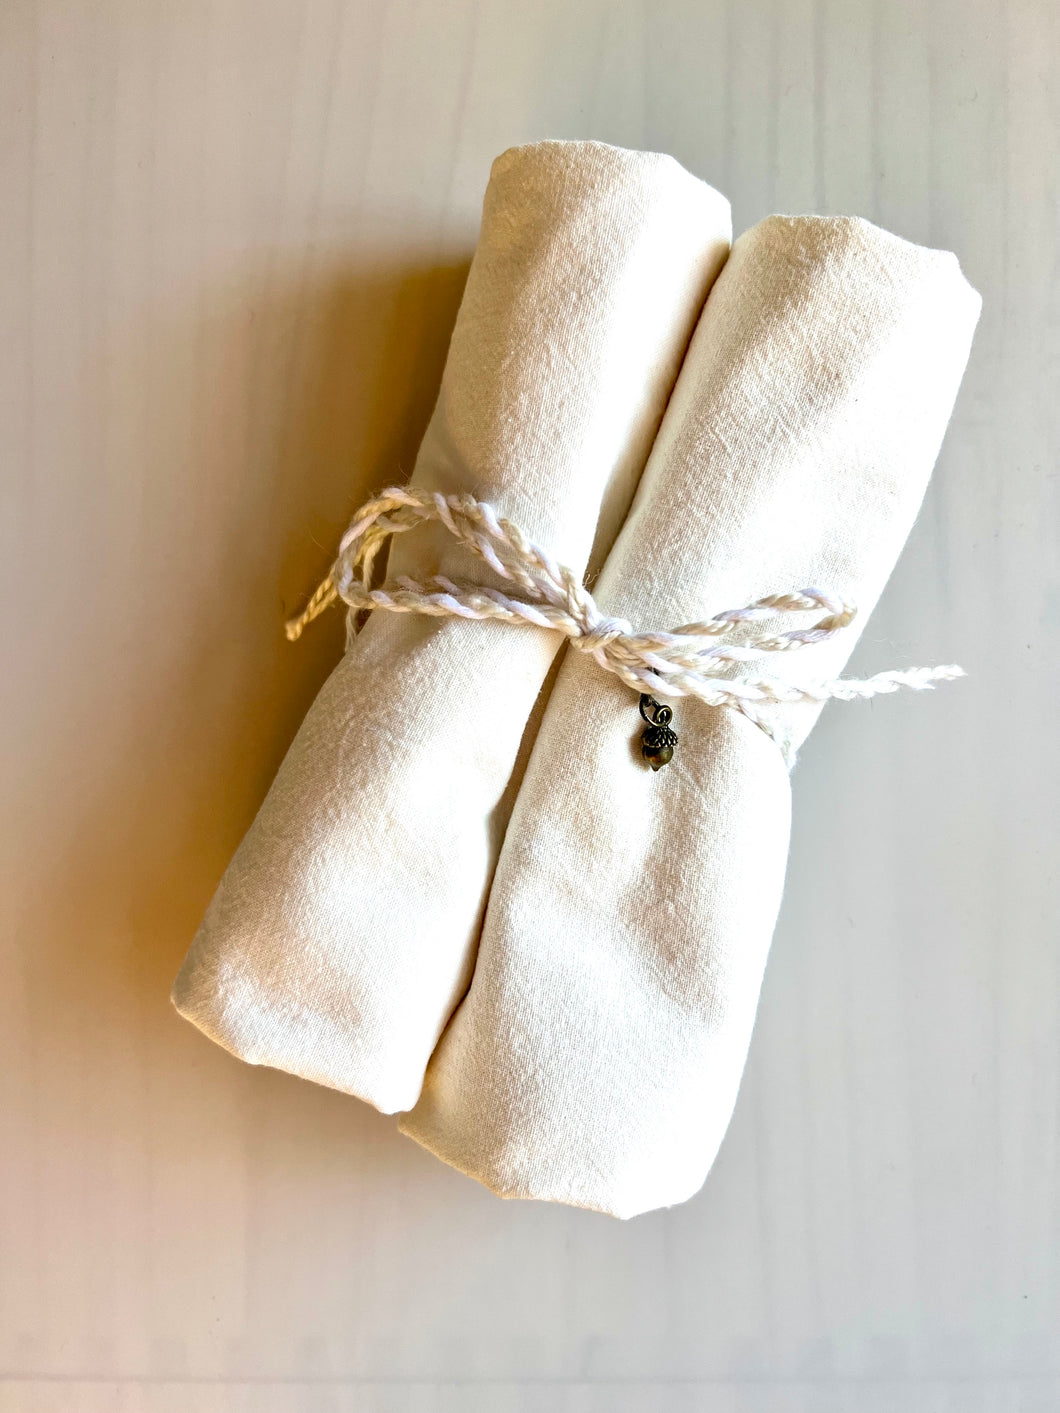 Two natural flour sack towels rolled up and tied together with decorative twine and a small brass acorn charm.